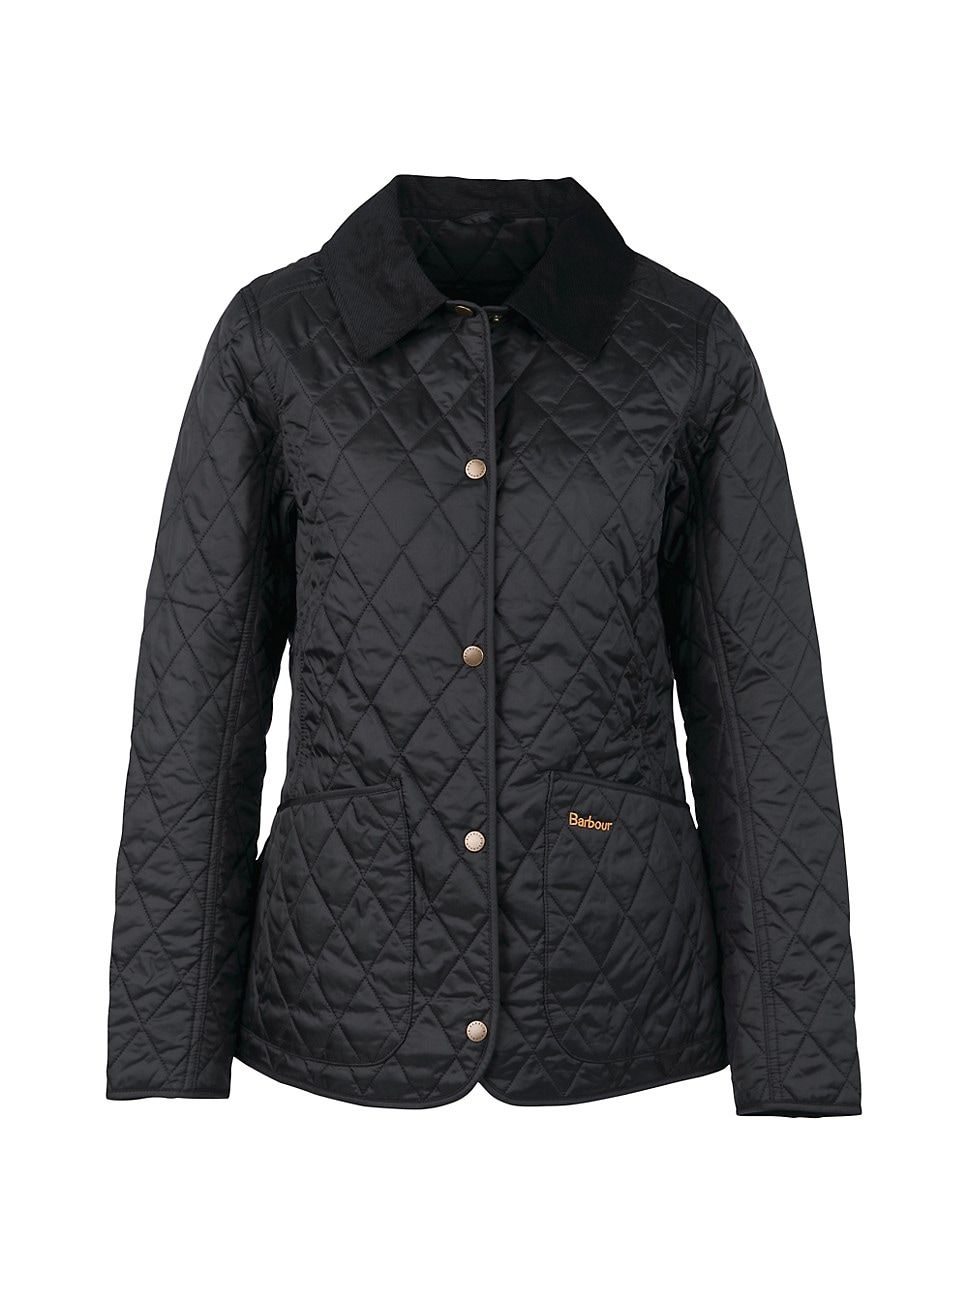 Annandale Quilted Jacket | Saks Fifth Avenue